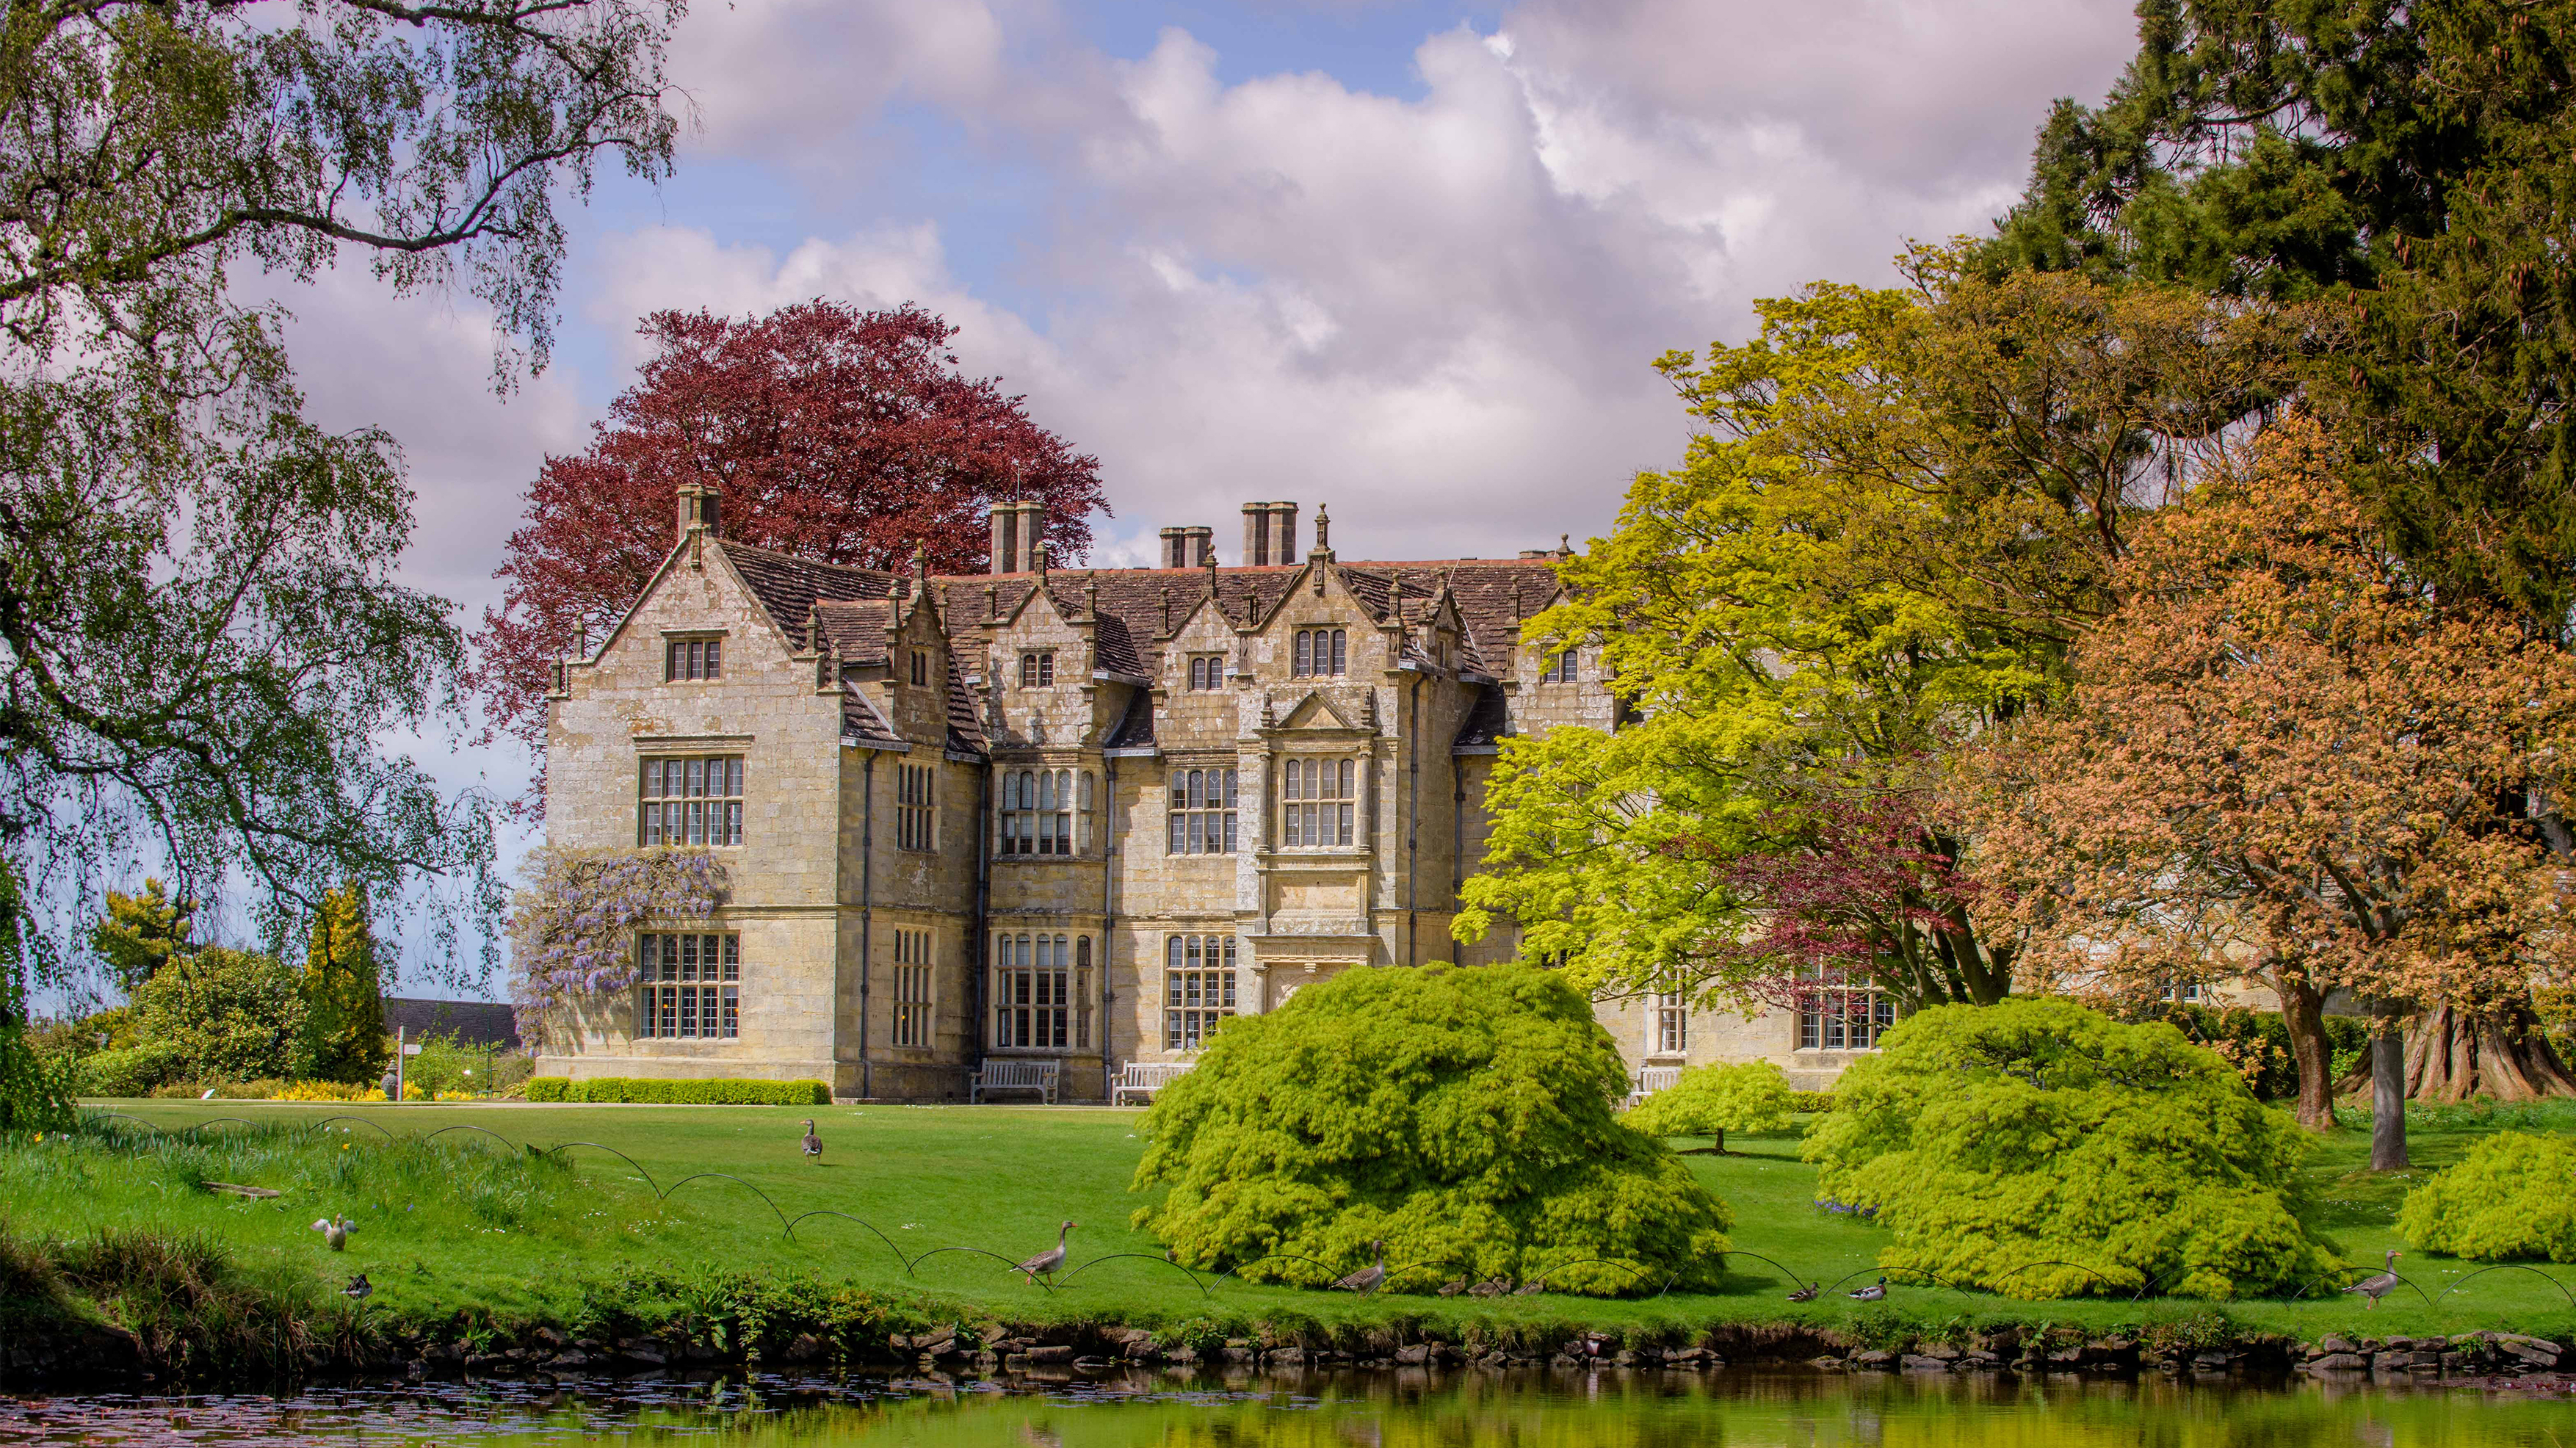 Wakehurst Mansion surrounded by trees and green grass